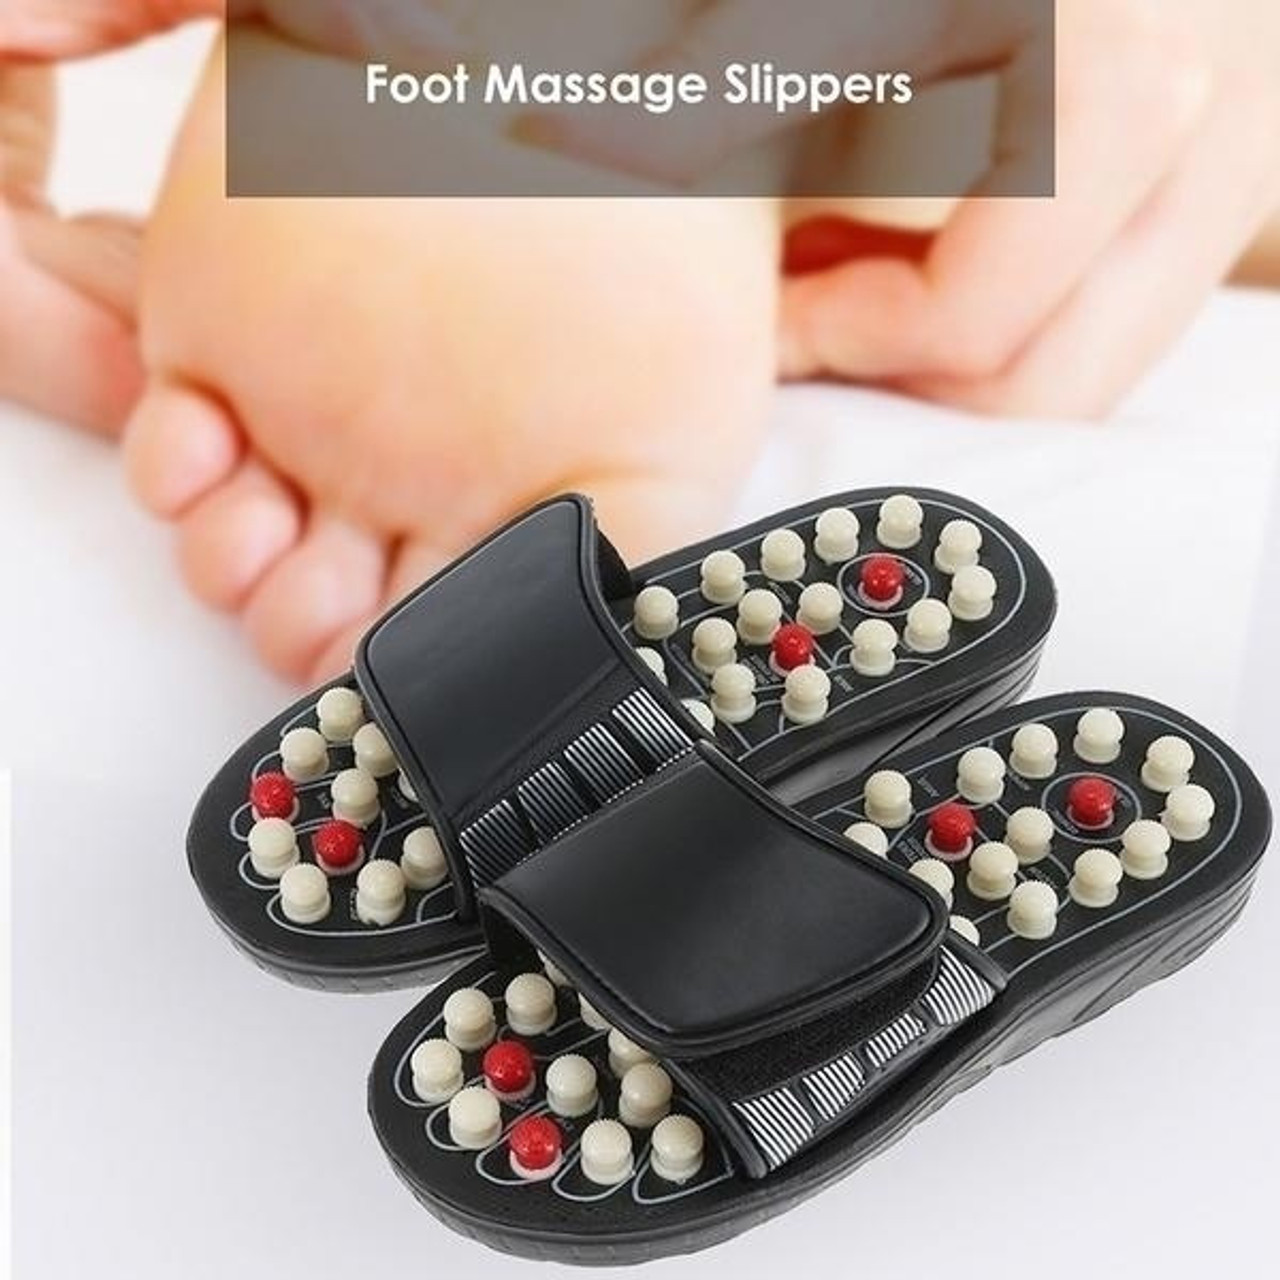 Modern Caribbean Enterprises Ltd - MASSAGE YOUR FEET WHILE YOU WALK RELIEVE  PAIN AND TIREDNESS IN THE LEGS, HIPS & BACK. DELIVERY AVAILABLE VIA TTPOST  #magneticthearpy #sandal #comfortablefootwear #durable | Facebook